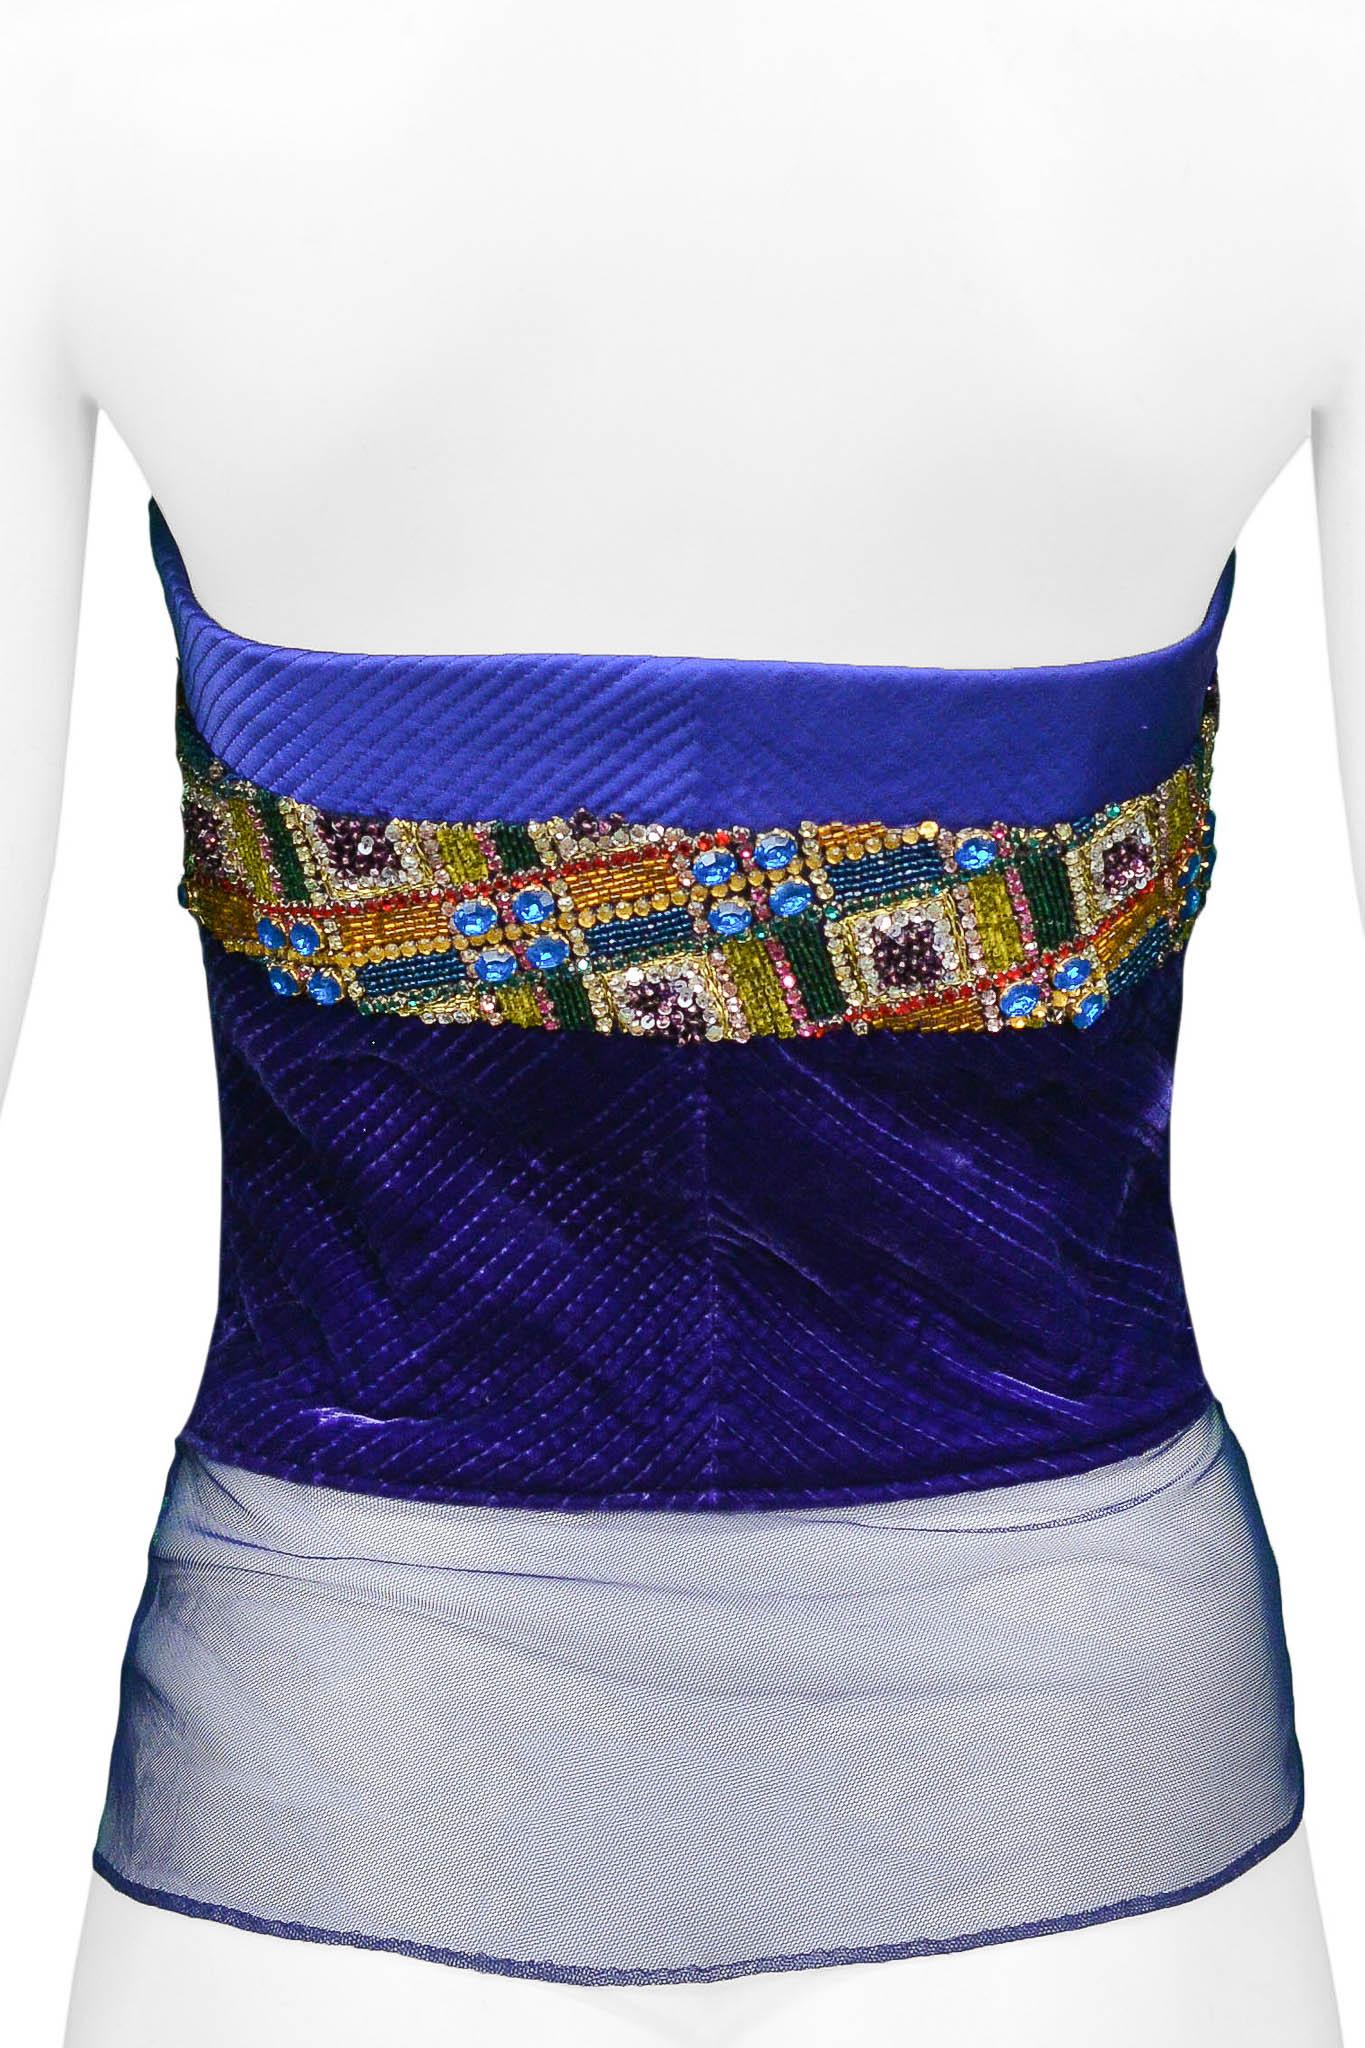 Gray Gianni Versace Rhinestone & Velvet Couture Bustier For Sale